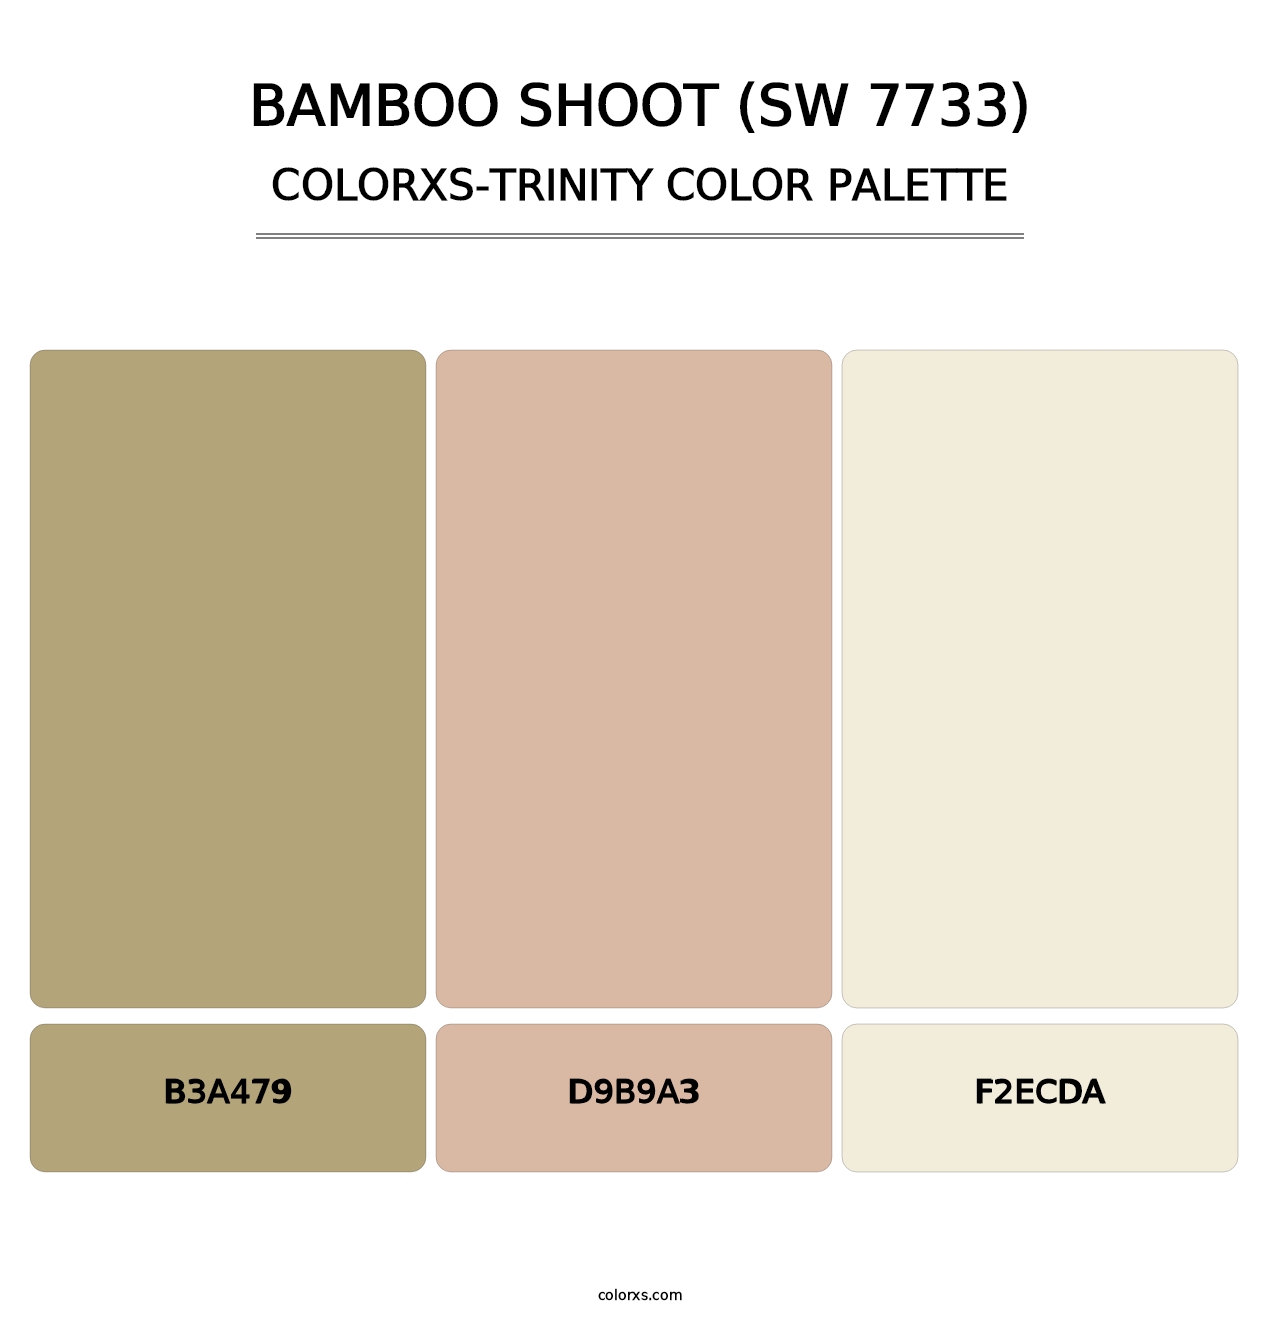 Bamboo Shoot (SW 7733) - Colorxs Trinity Palette